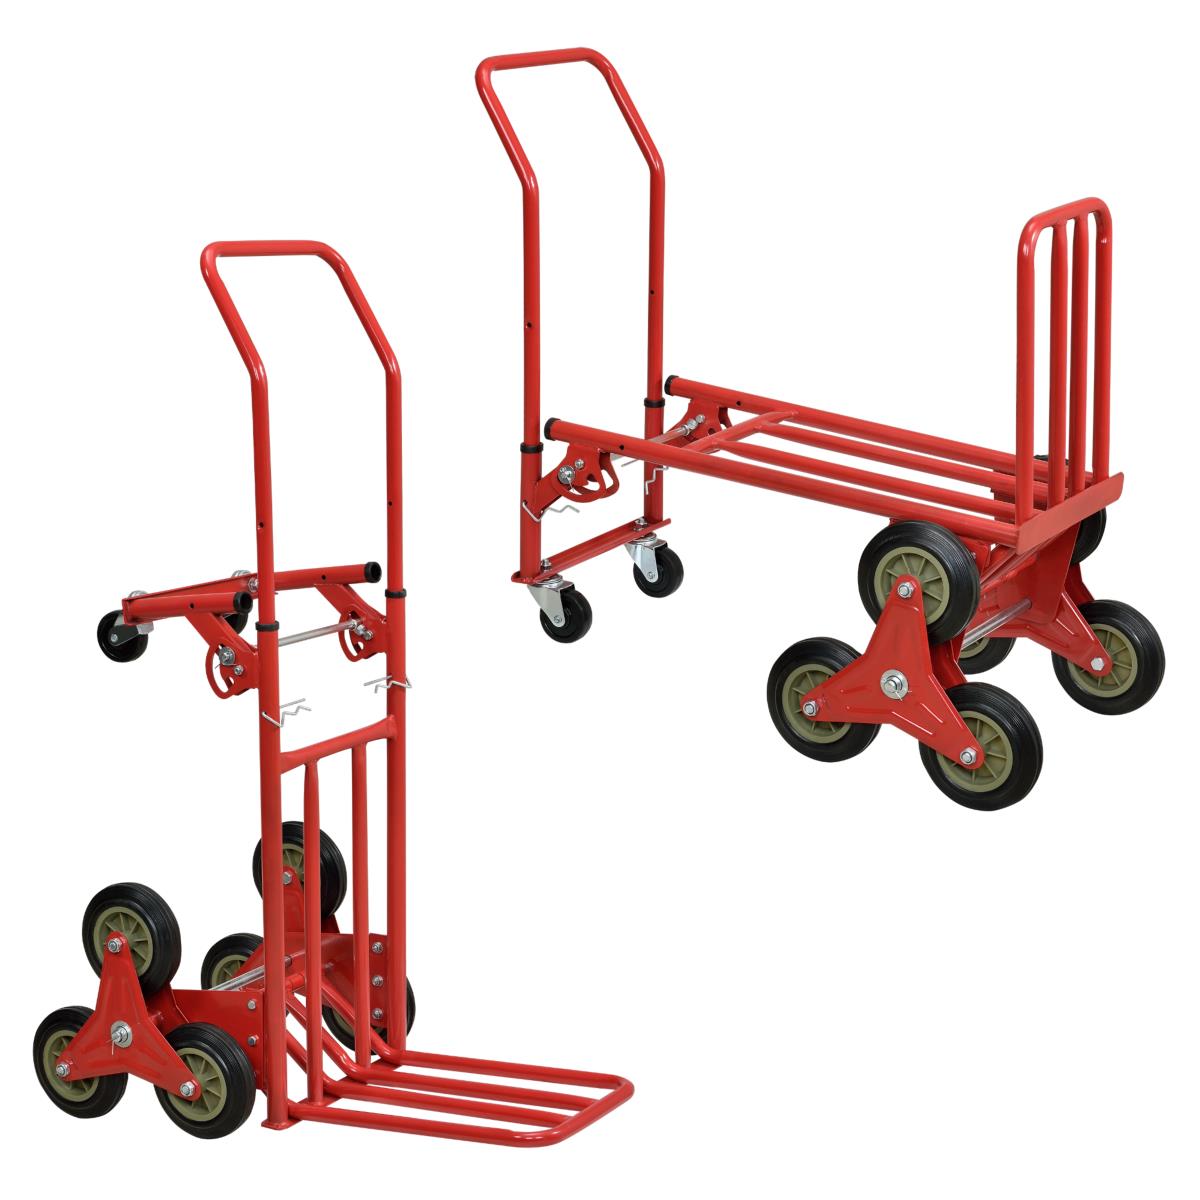 https://www.directachat56.fr/Files/31462/Img/06/diable-3-roues-pour-escalier-transformable-chariot-charge-200kg-01-zoom.jpg